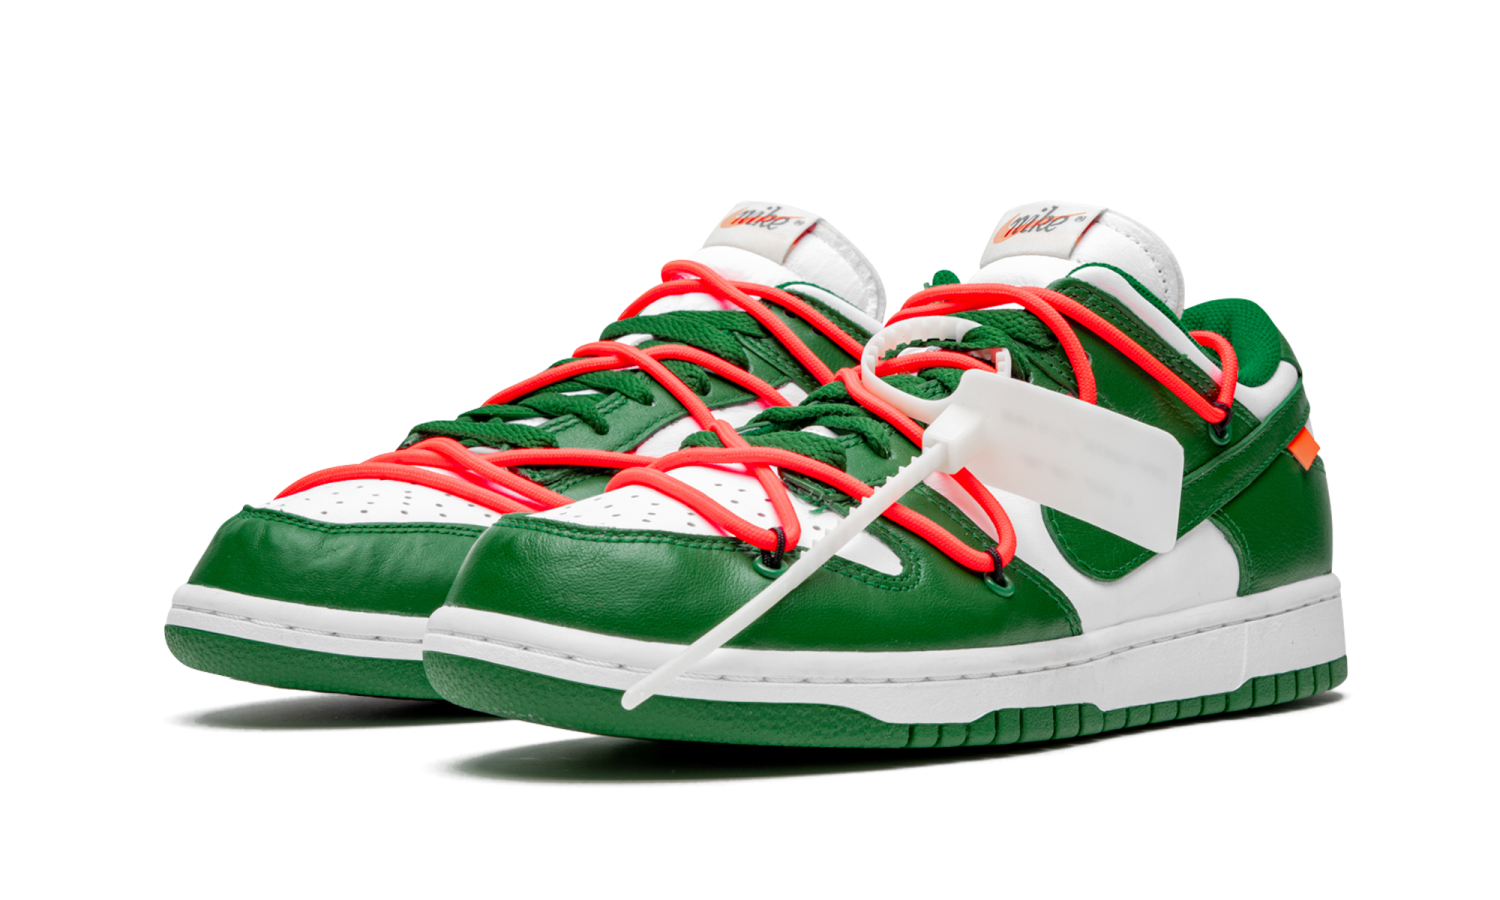 фото Dunk Low “Off-White - Pine Green” (Nike Dunk Low)-CT0856 100